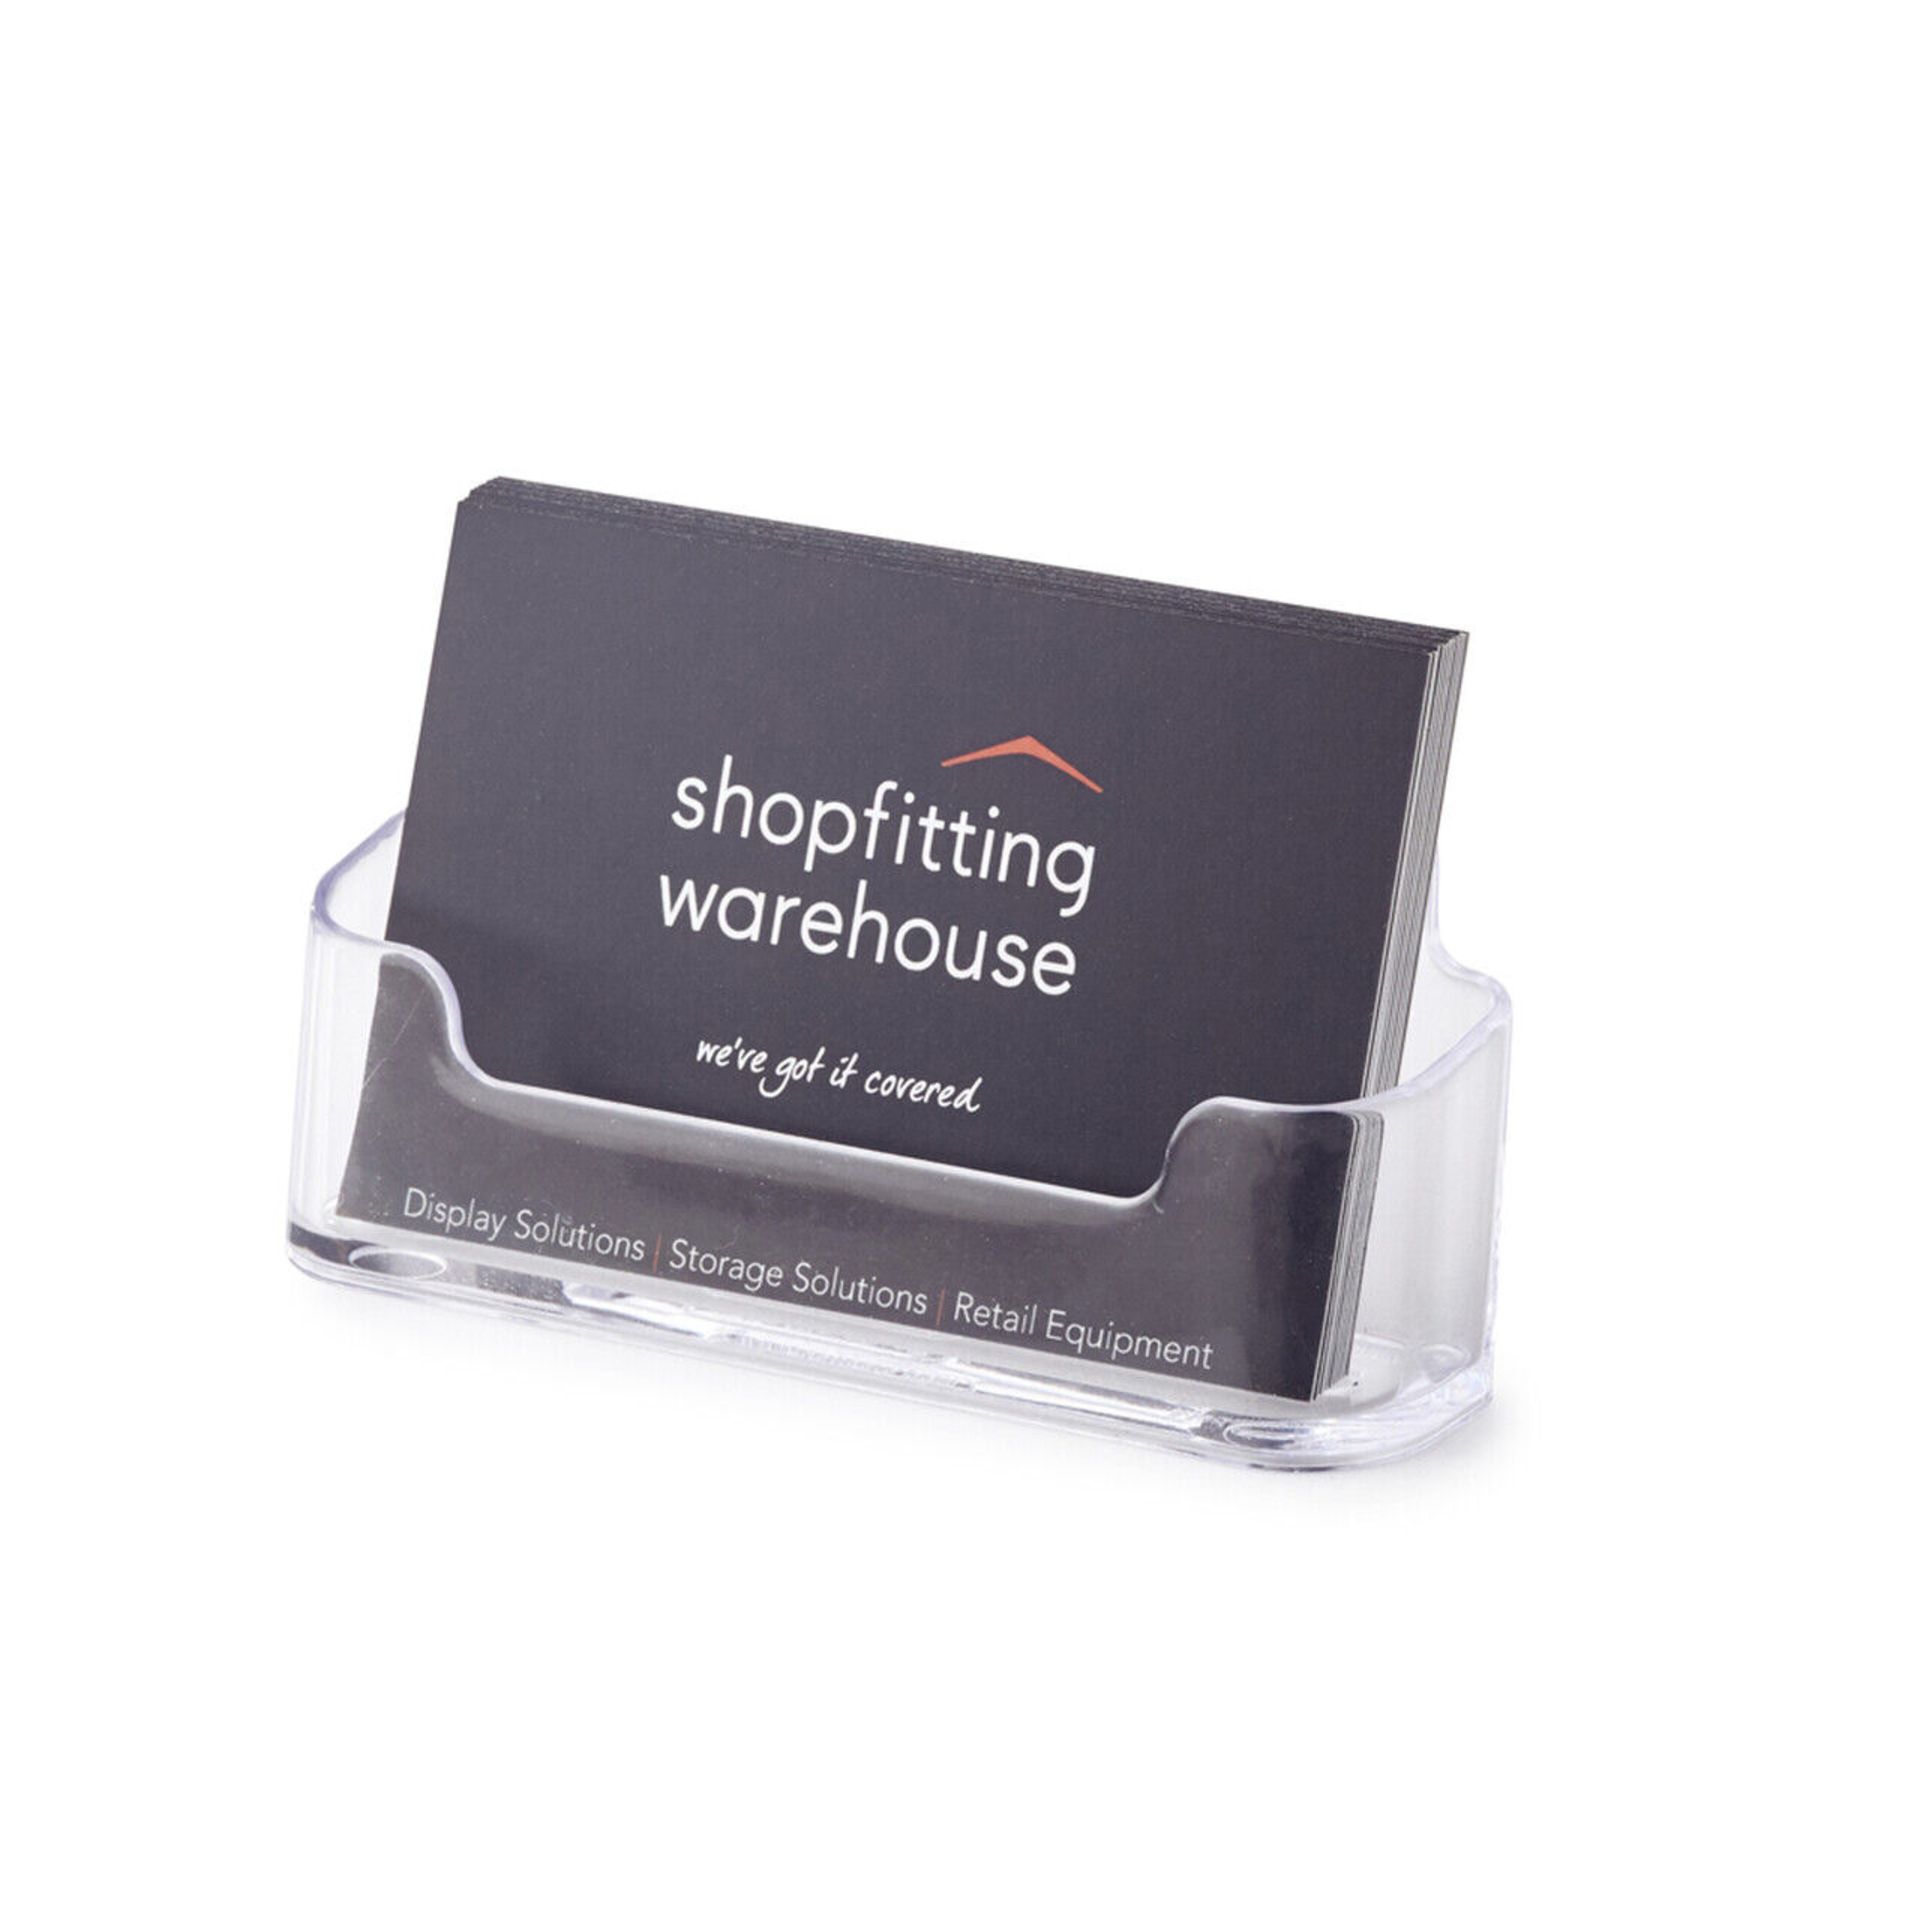 150 x Clear Acrylic Business Card Holder -Landscape - Image 2 of 2